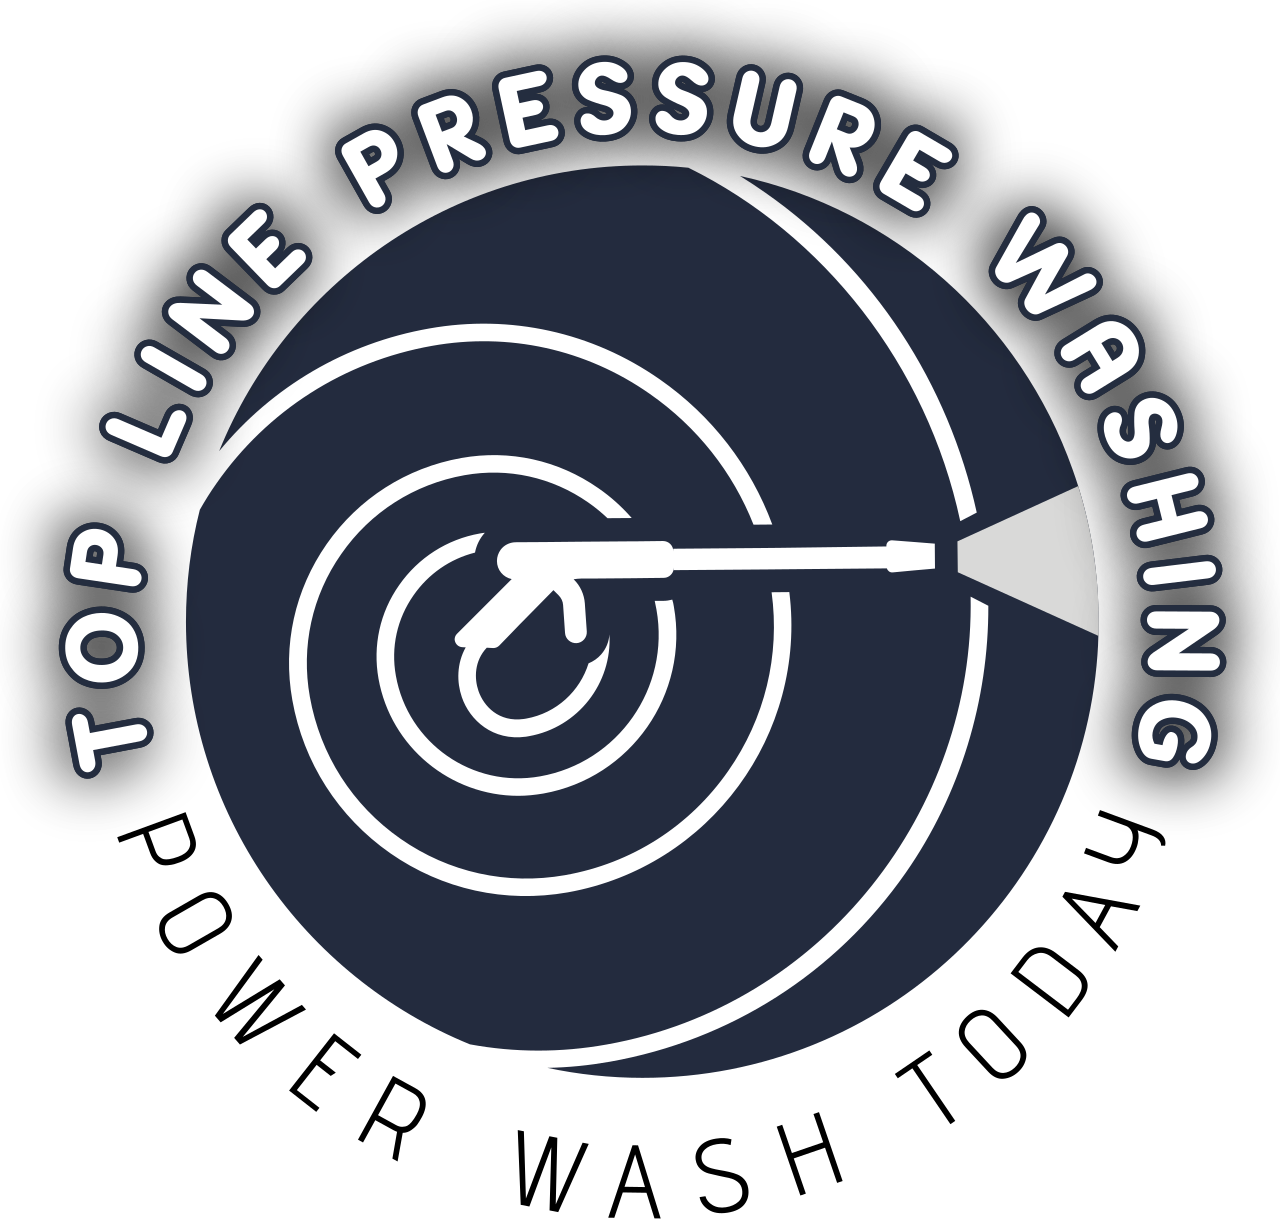 TOP LINE PRESSURE WASHING's web page